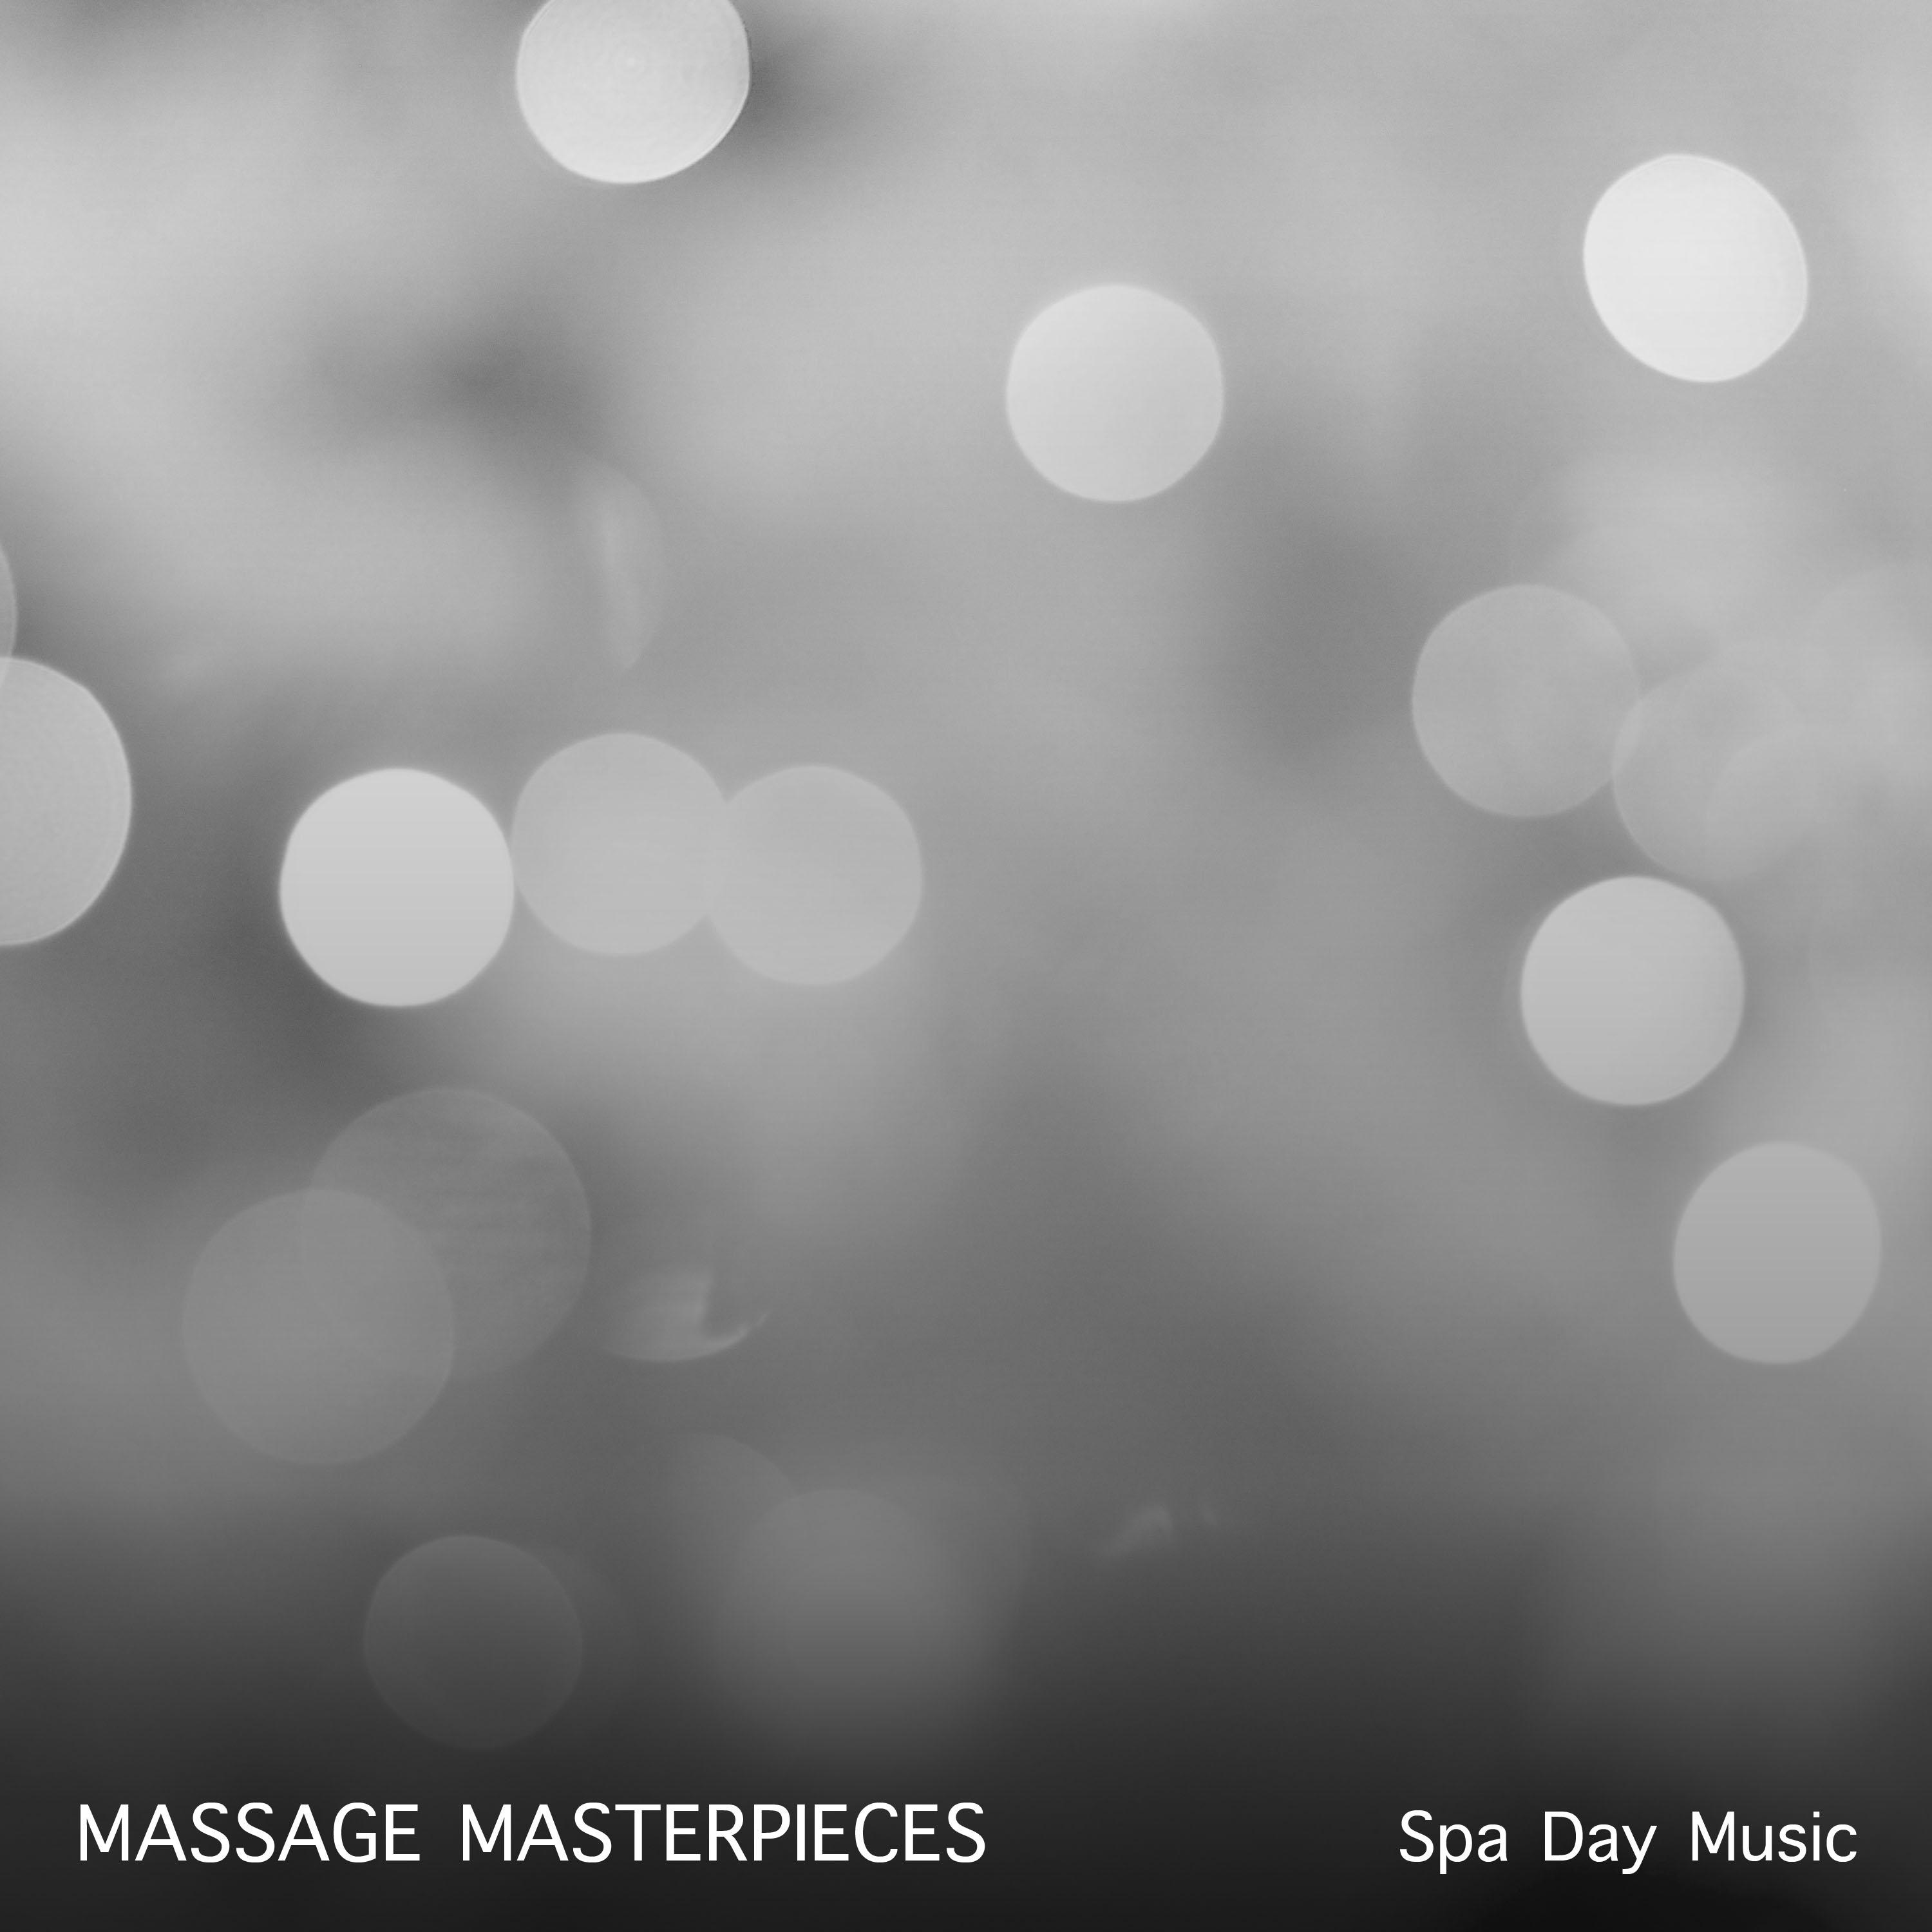 15 Massage Masterpieces - Ultimate Spa Day music